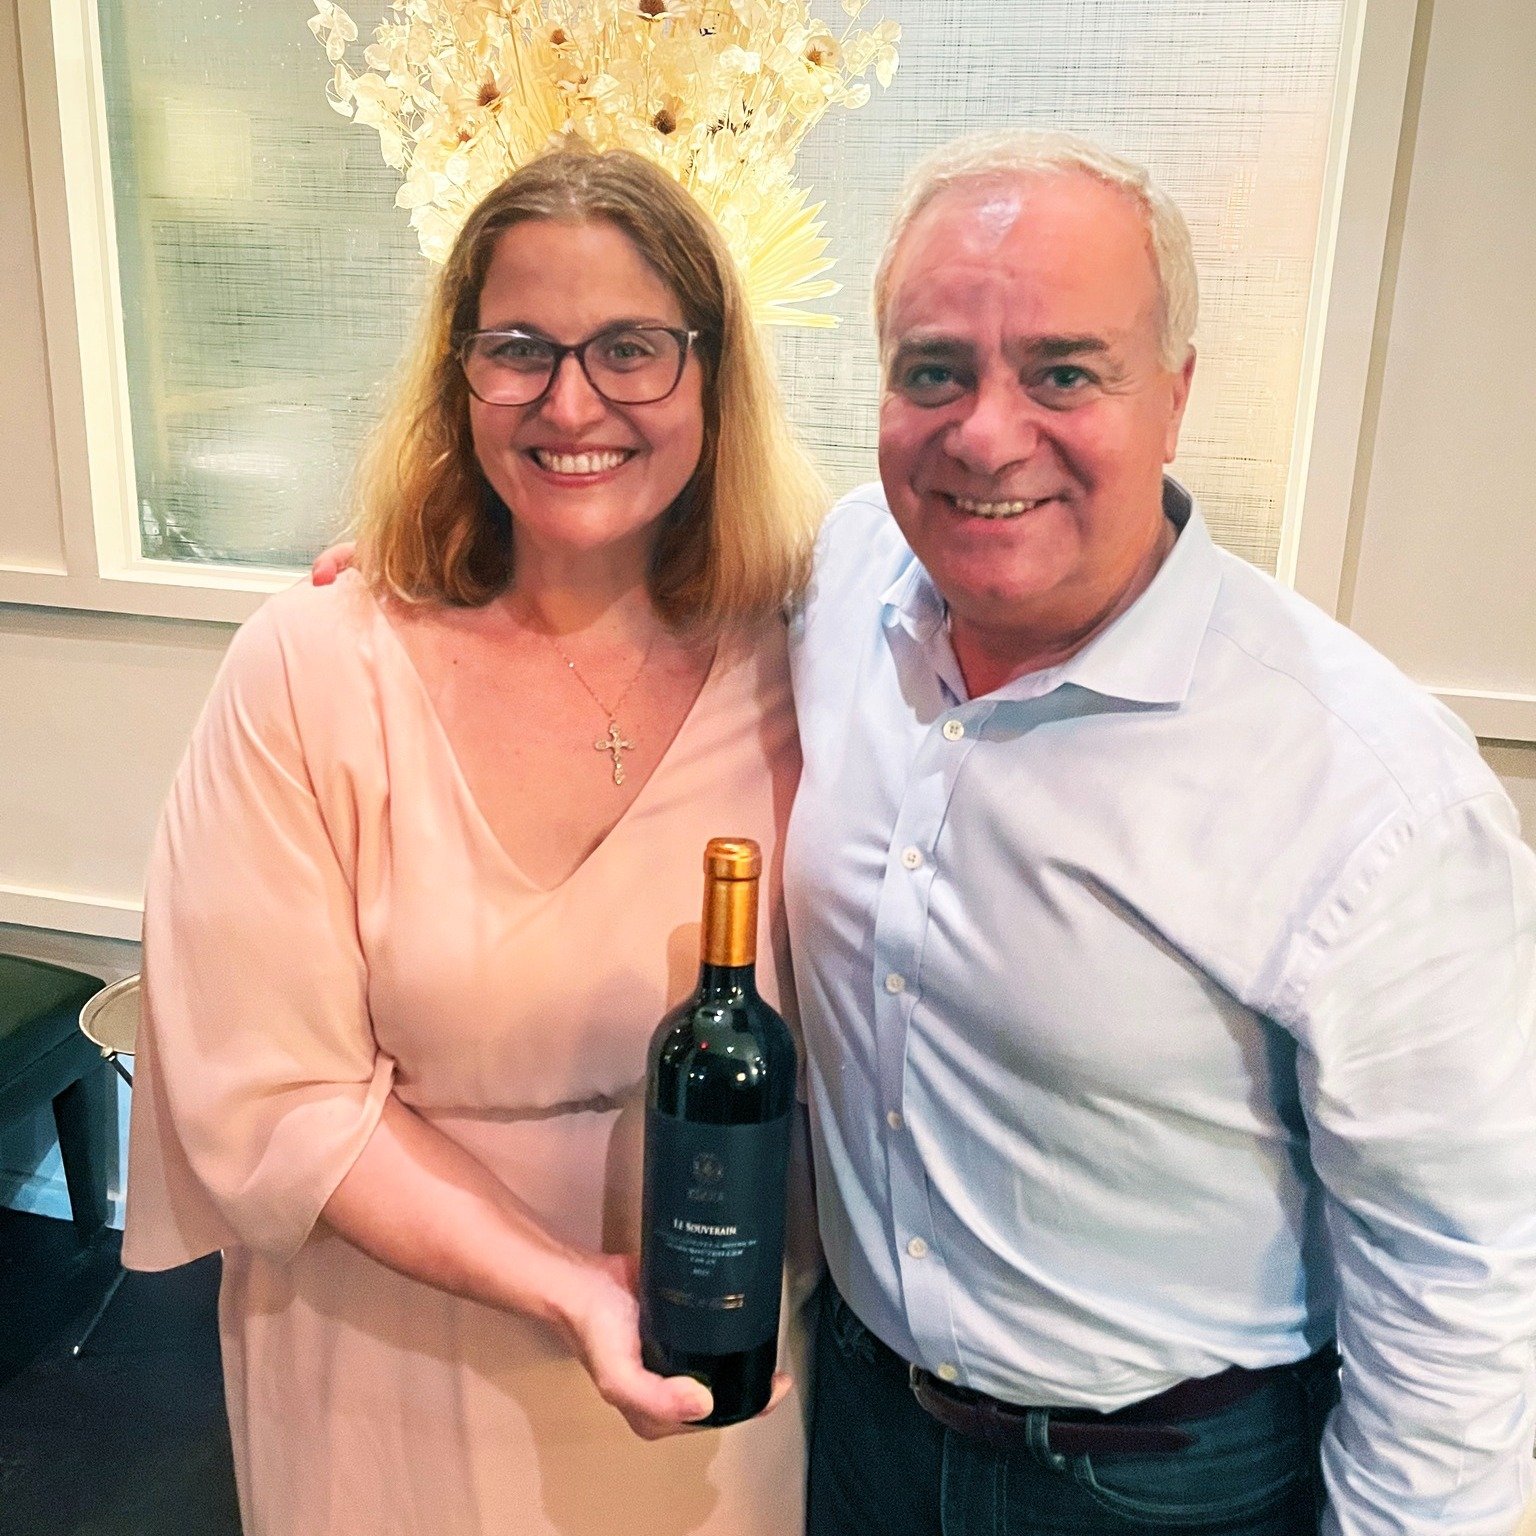 MISA has been delighted to welcome again our dear friend Elie Maamari, Oenologist and Export Director of Ch&acirc;teau Ksara, the oldest continuously operated winery in Lebanon which was founded by the Jesuits in 1857. Elie treated us to a tasting at